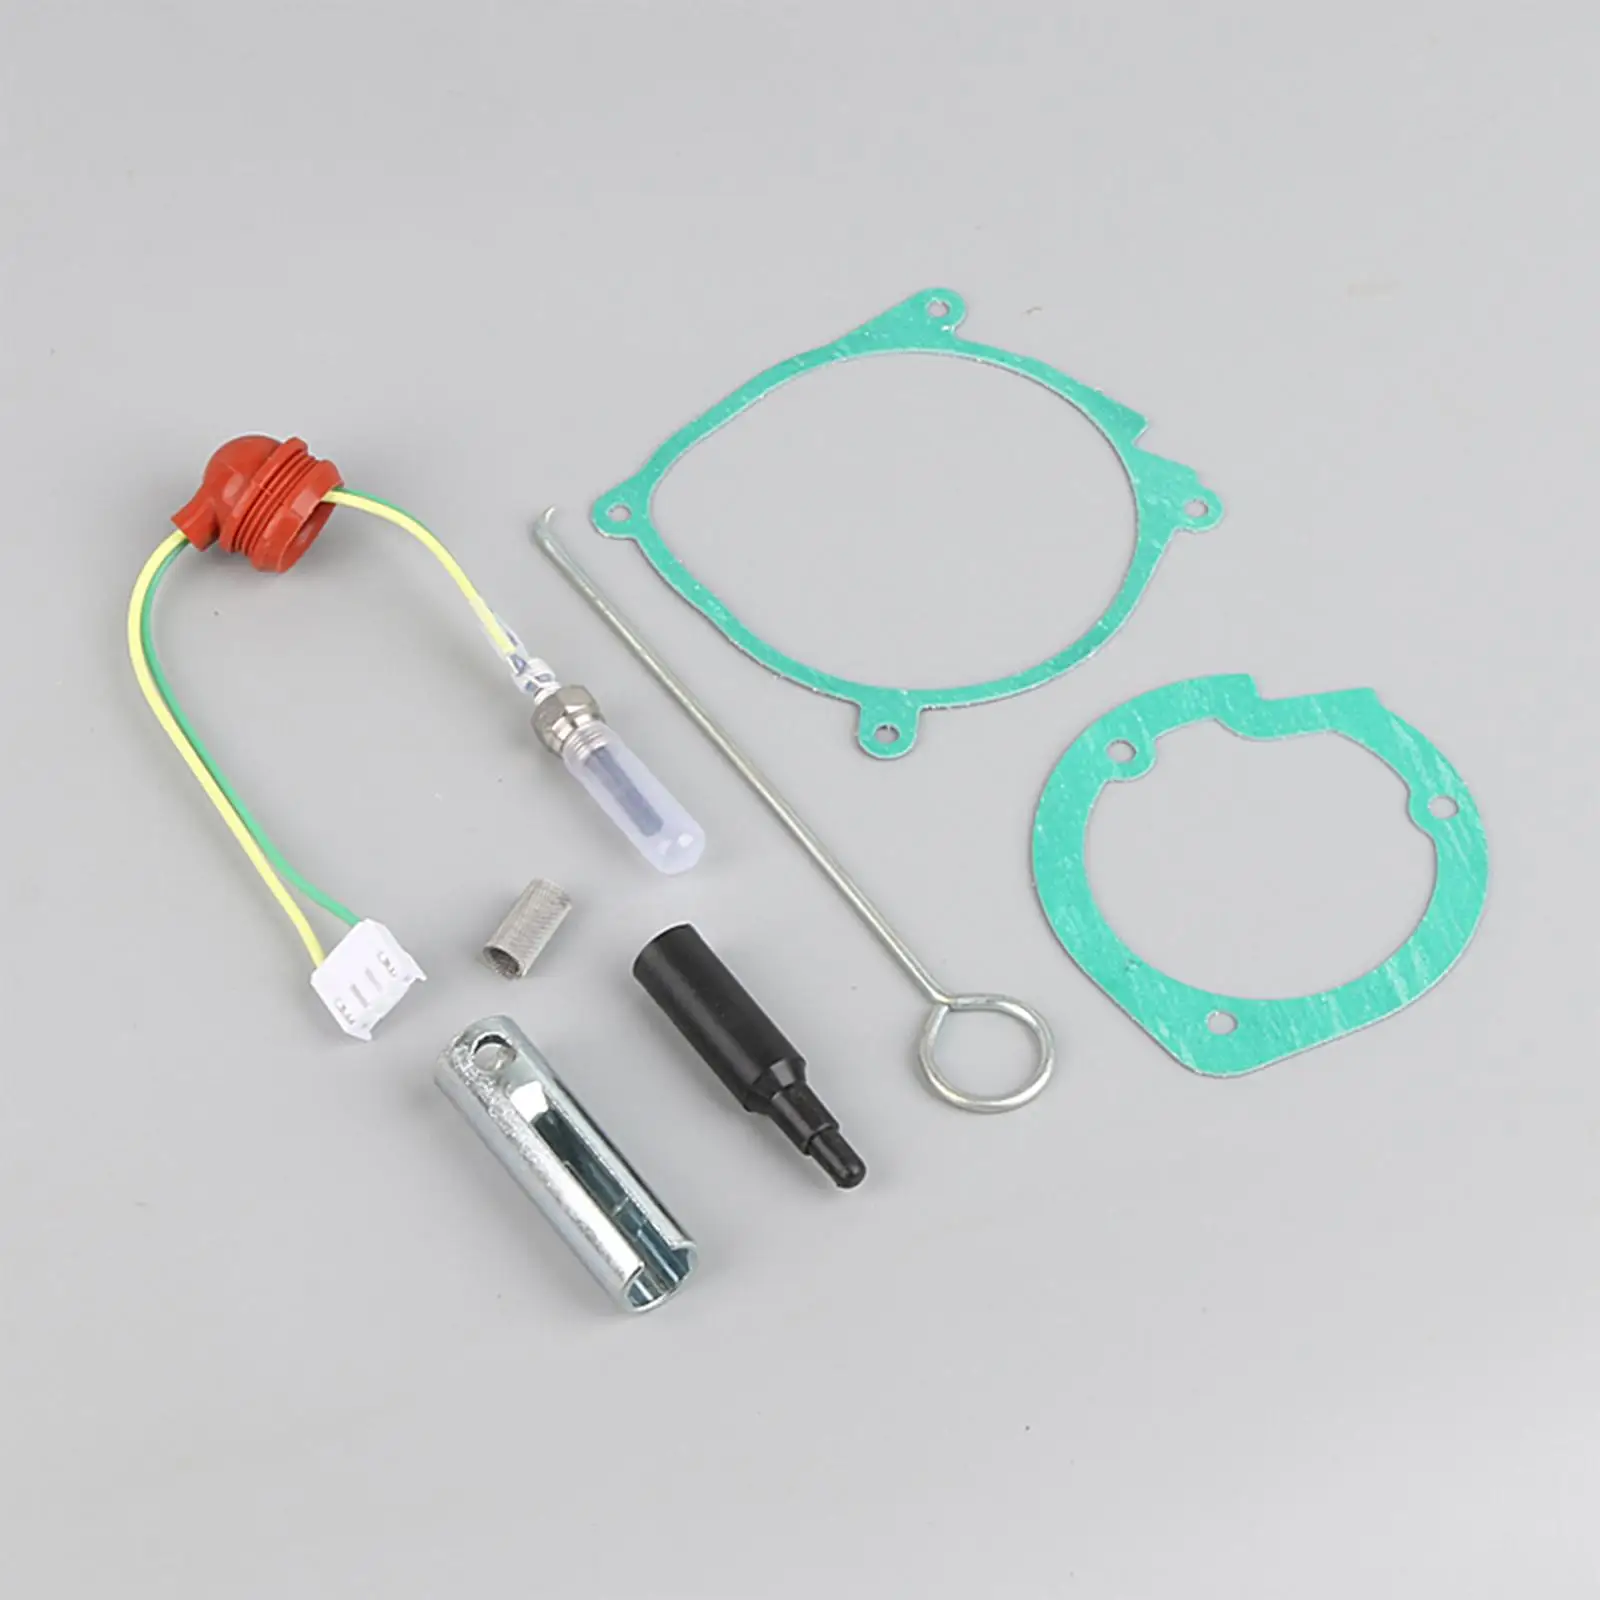 Glow Plug Repair Kit Direct Replaces Heater Accessories Net Car Heater Repair Parts for 12V 2kW Parking Heater Boat Vehicle